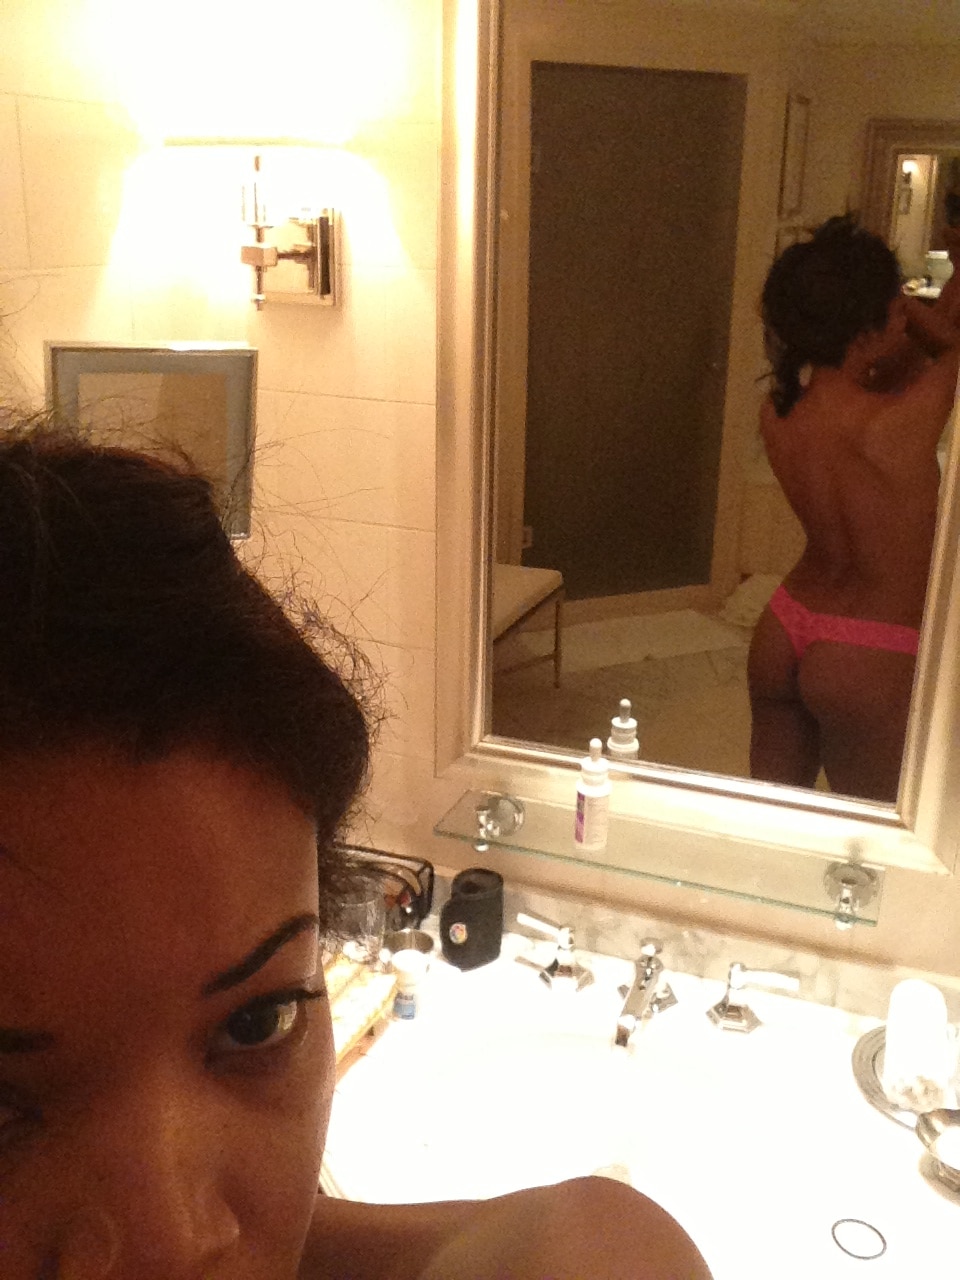 sexy actress gabrielle union showing off her ass in mirror